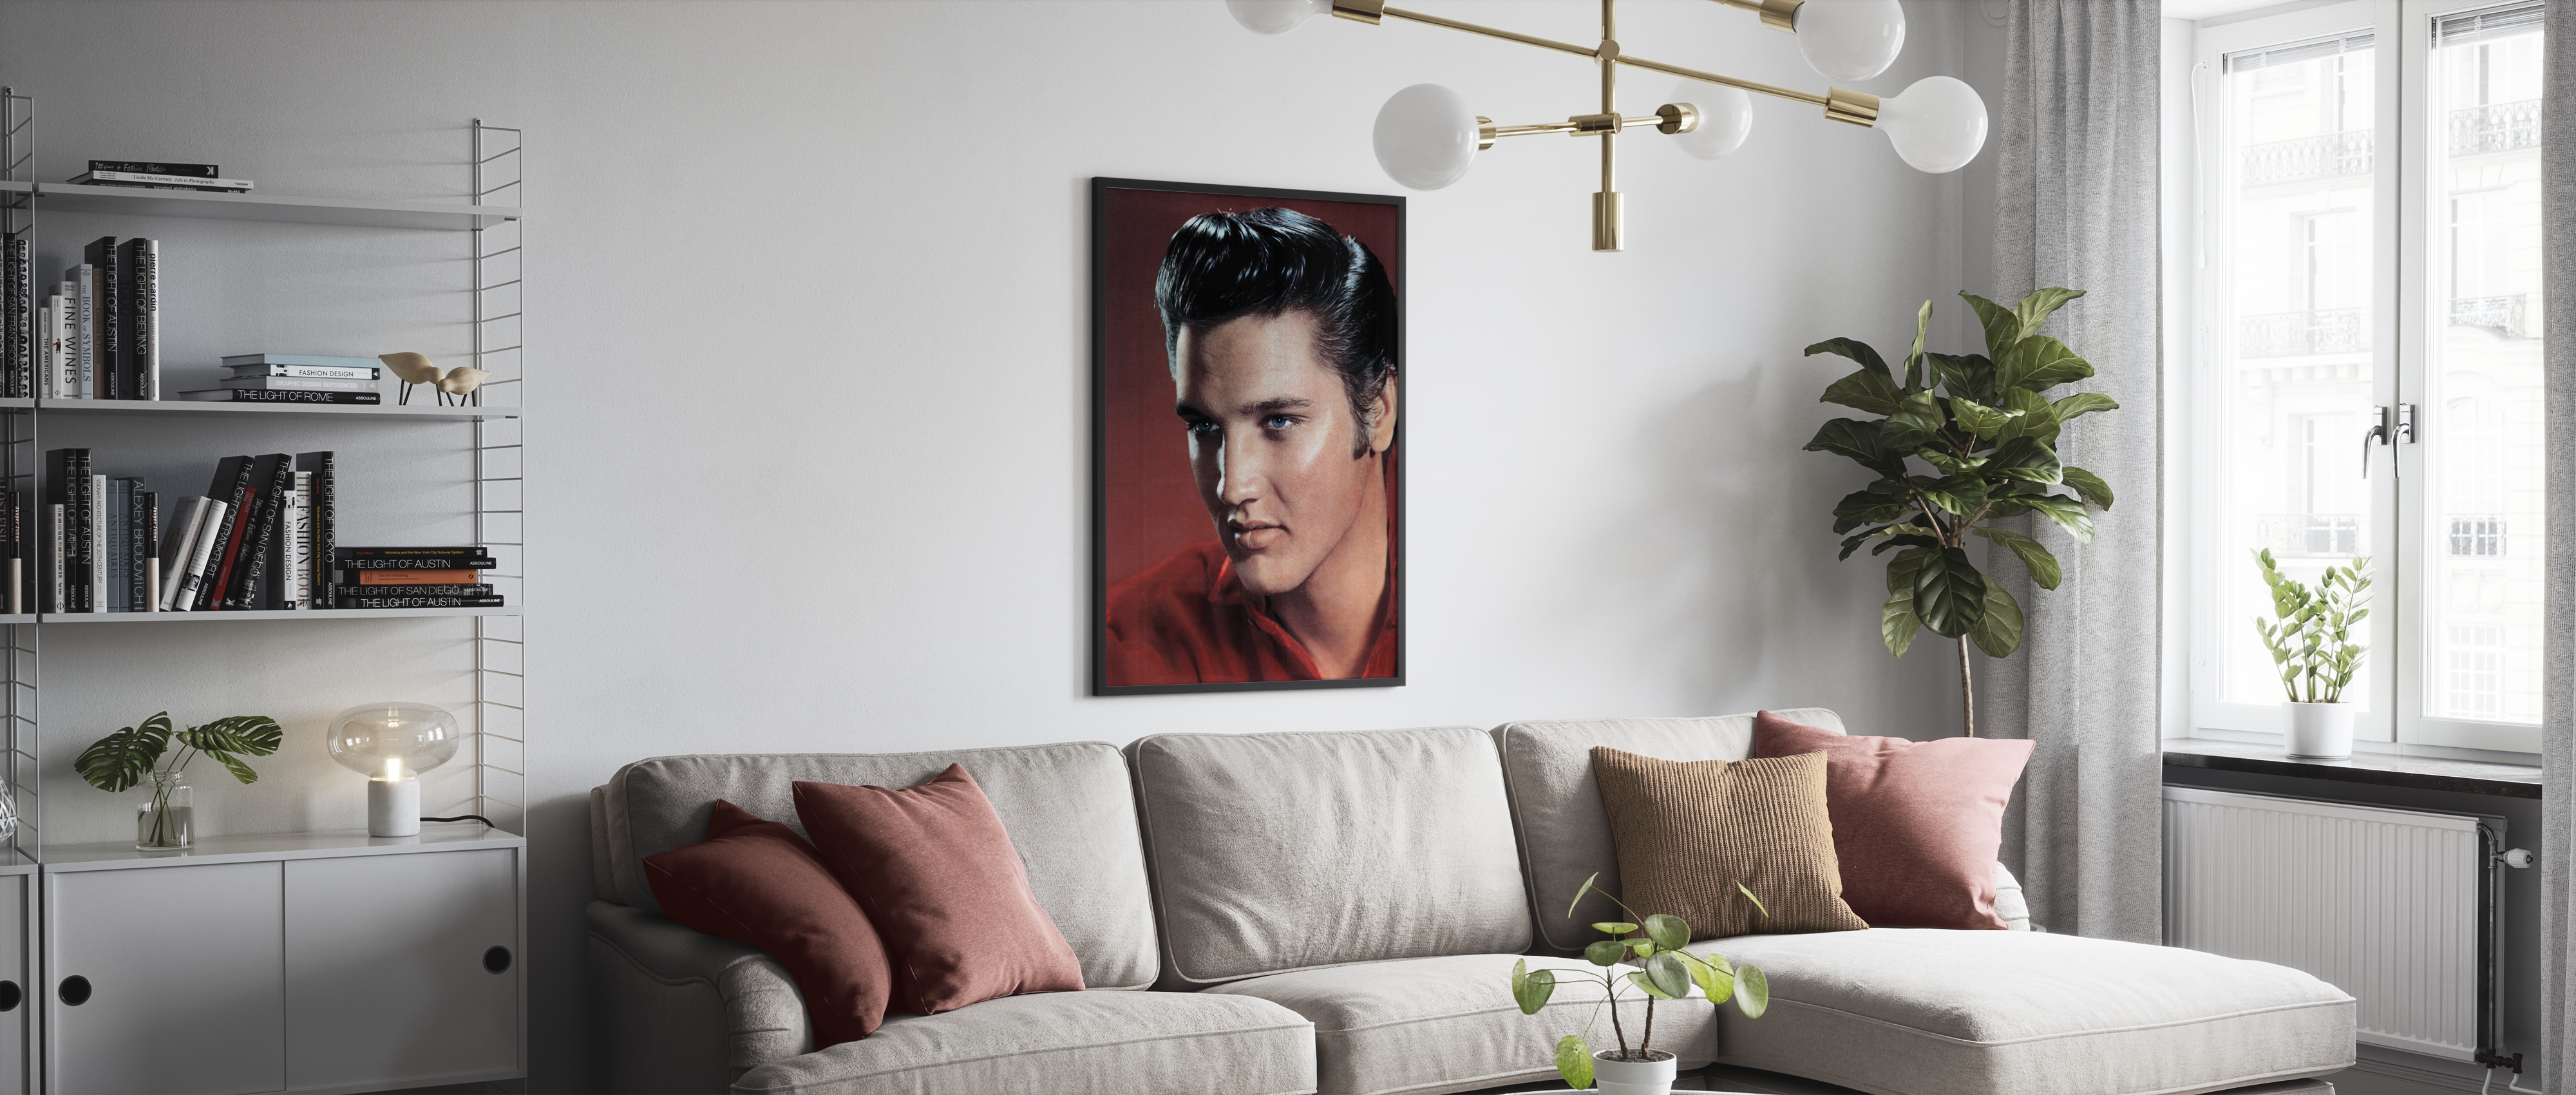 Elvis Presley Live Wall Poster Art 24x36 Free Shipping 